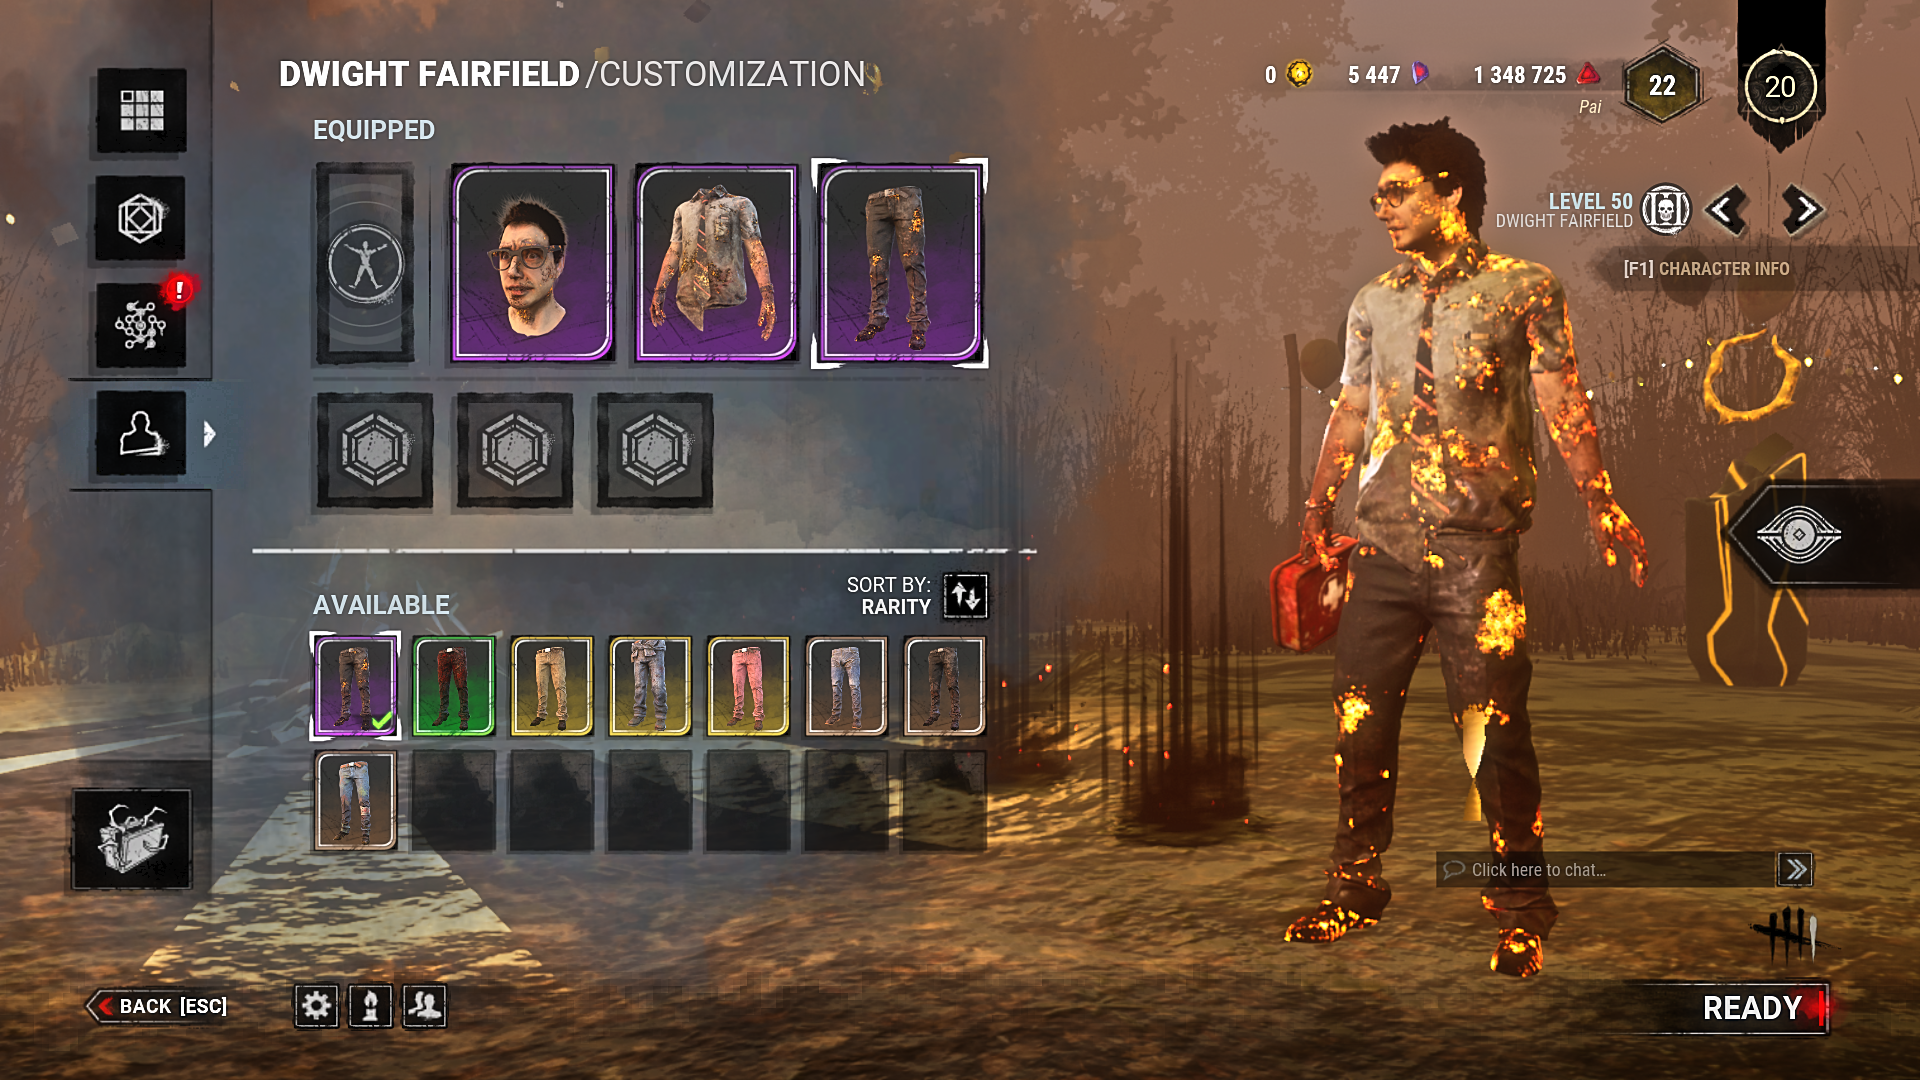 Sold Very Rare Legit Legacy Account With Dwight L3 And Other 1090 Epicnpc Marketplace